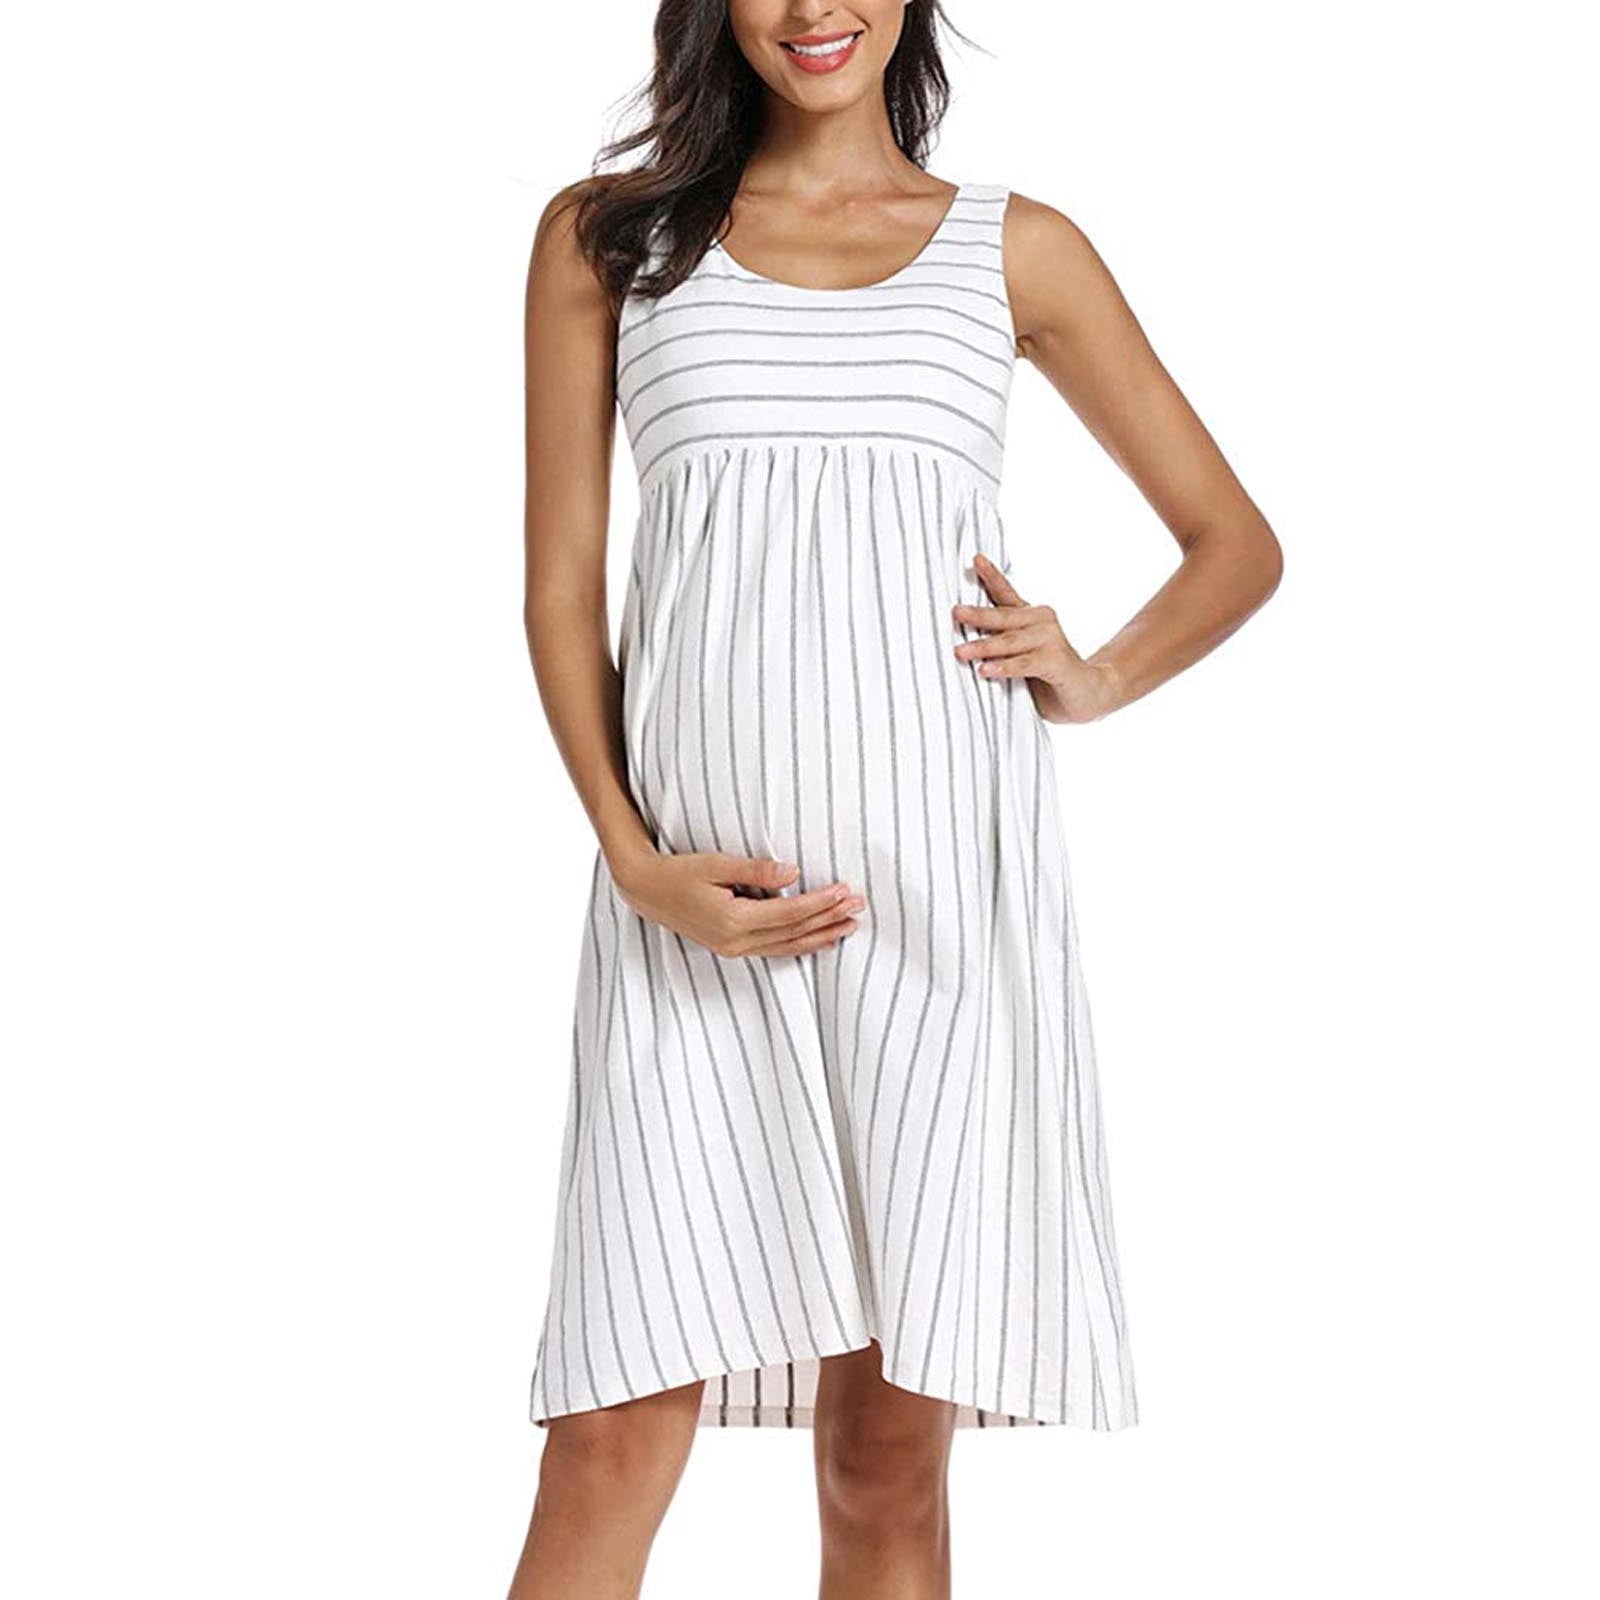 Giligiliso Clearance Maternity Clothes for Women Woman O-Neck Stripe ...